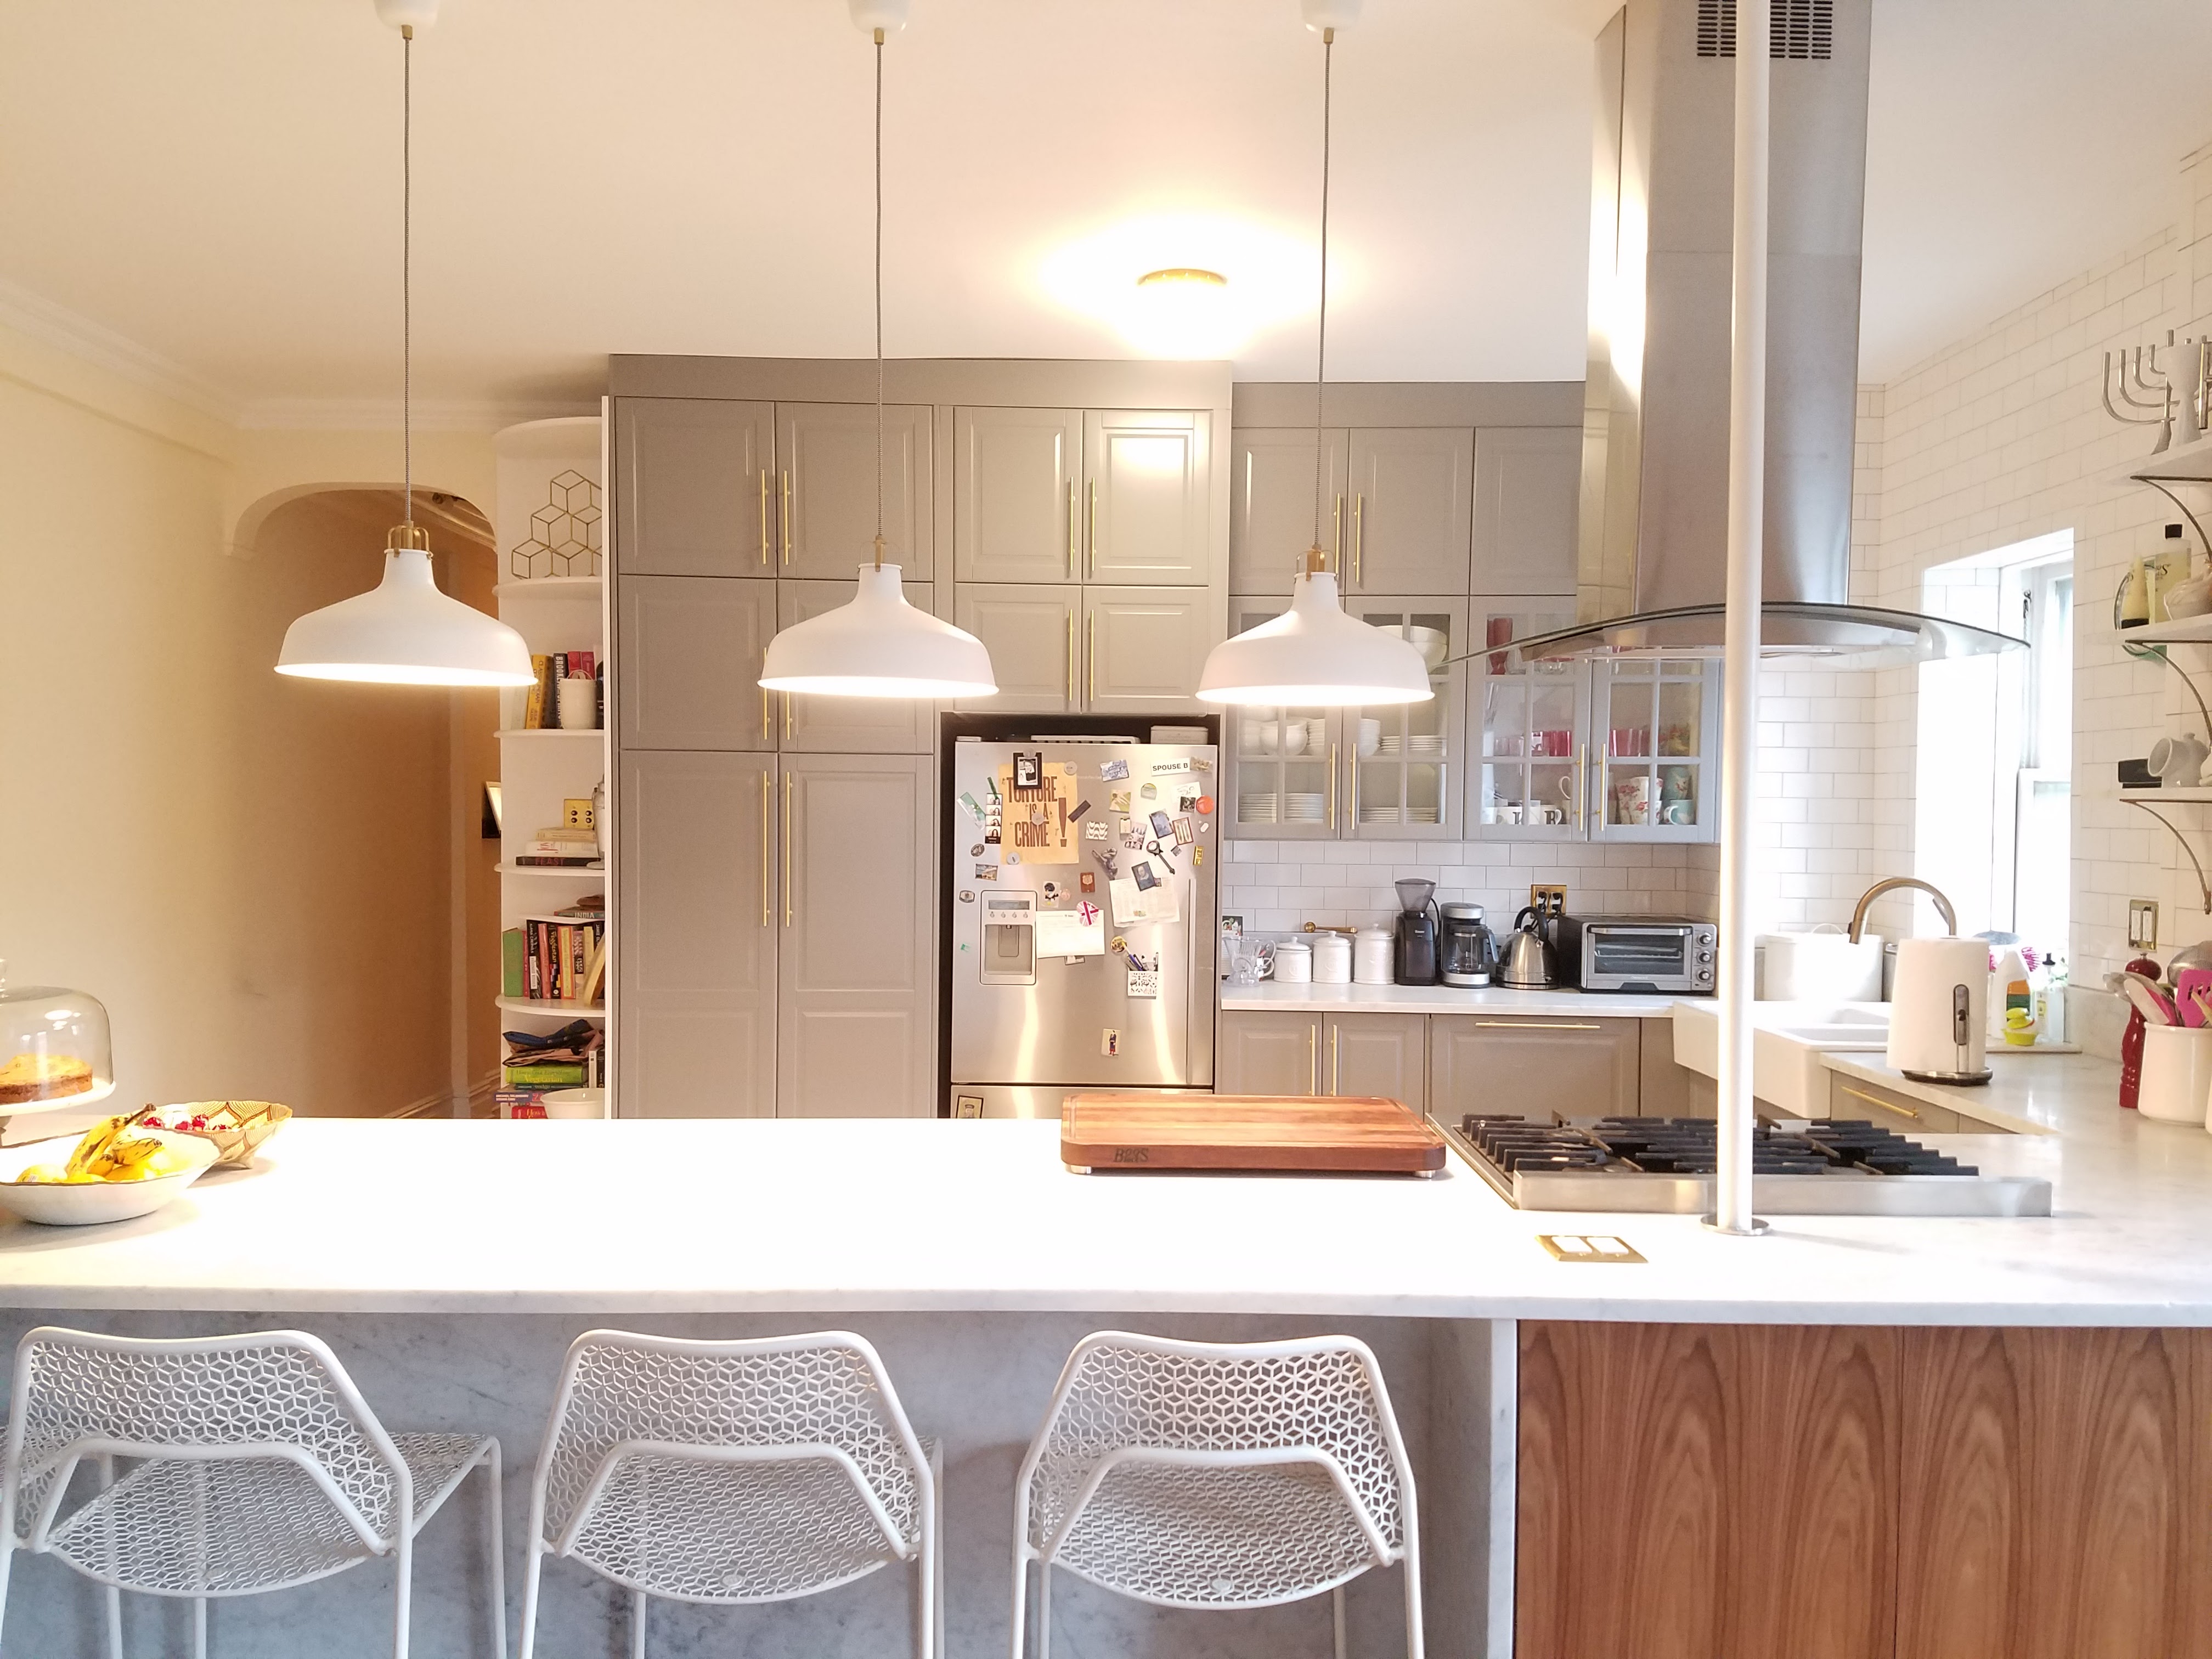 Did You Know? IKEA Kitchens from Around the World